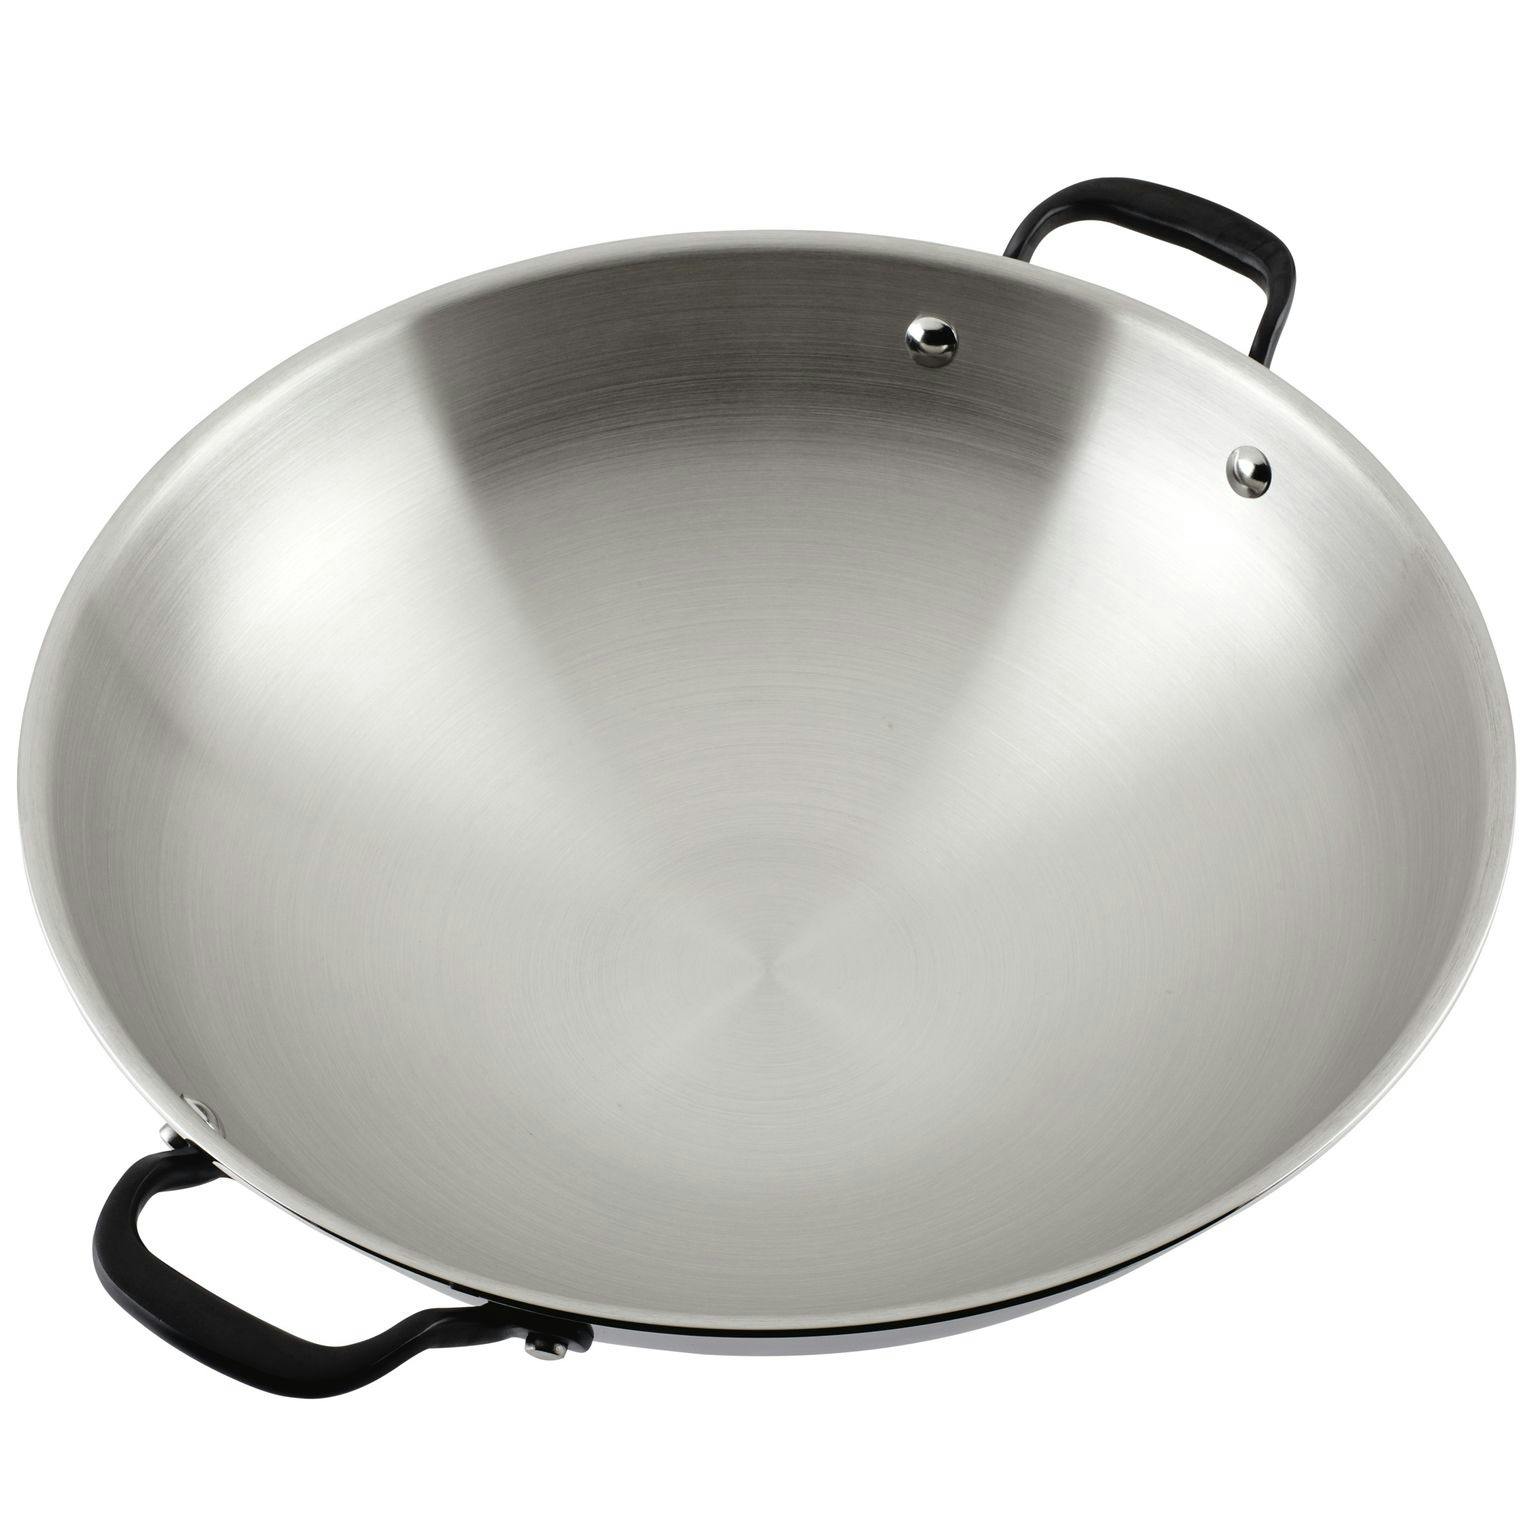 KitchenAid 5-Ply Clad Stainless Steel Induction Wok, 15-Inch, Polished Stainless Steel